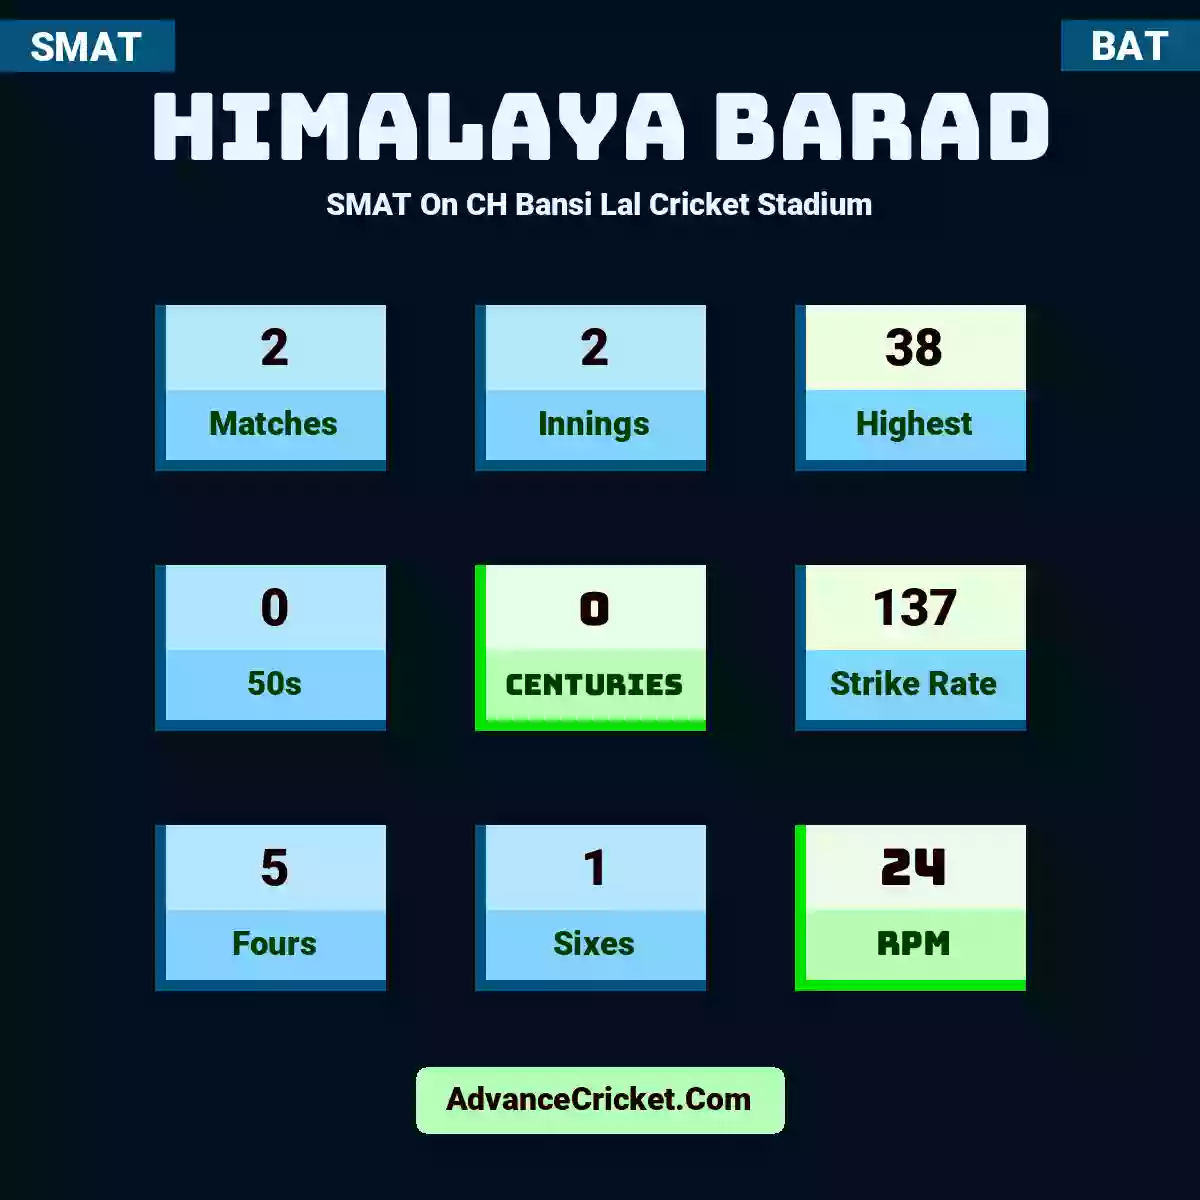 Himalaya Barad SMAT  On CH Bansi Lal Cricket Stadium, Himalaya Barad played 2 matches, scored 38 runs as highest, 0 half-centuries, and 0 centuries, with a strike rate of 137. H.Barad hit 5 fours and 1 sixes, with an RPM of 24.